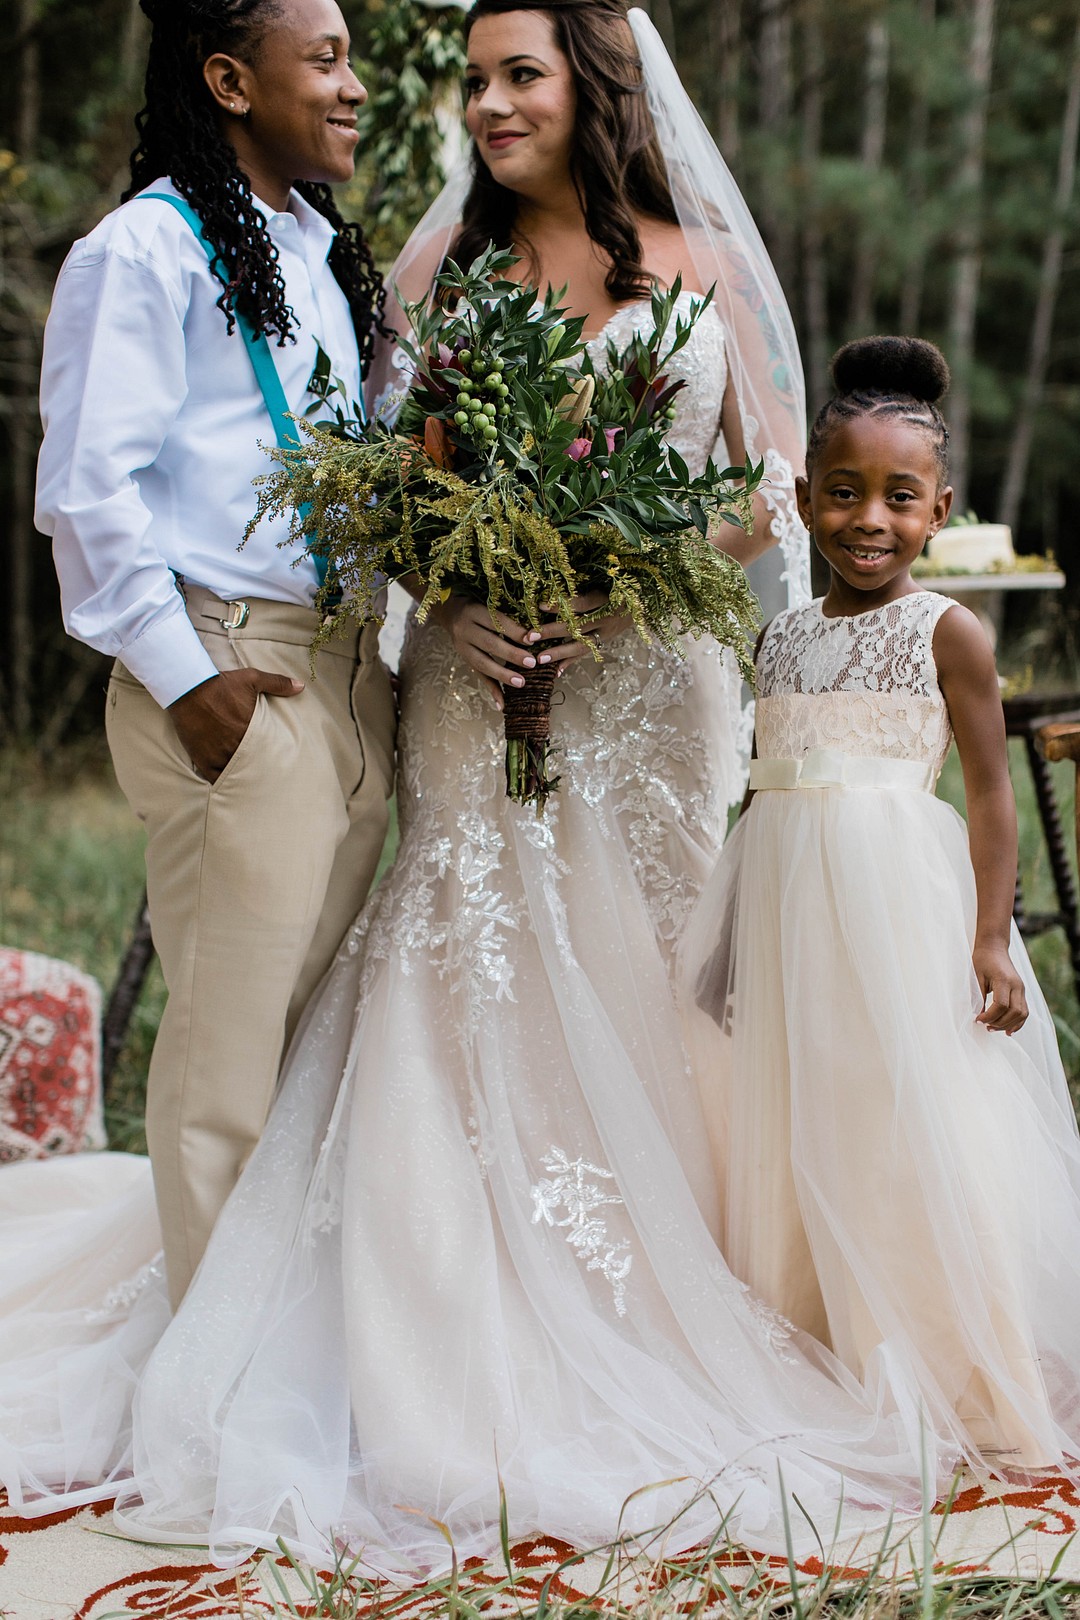 Bohemian winter elopement photos in Irmo, South Carolina LGBTQ+ weddings kiss elope intimate wedding celebration inspiration styled shoot real couple two brides daughter